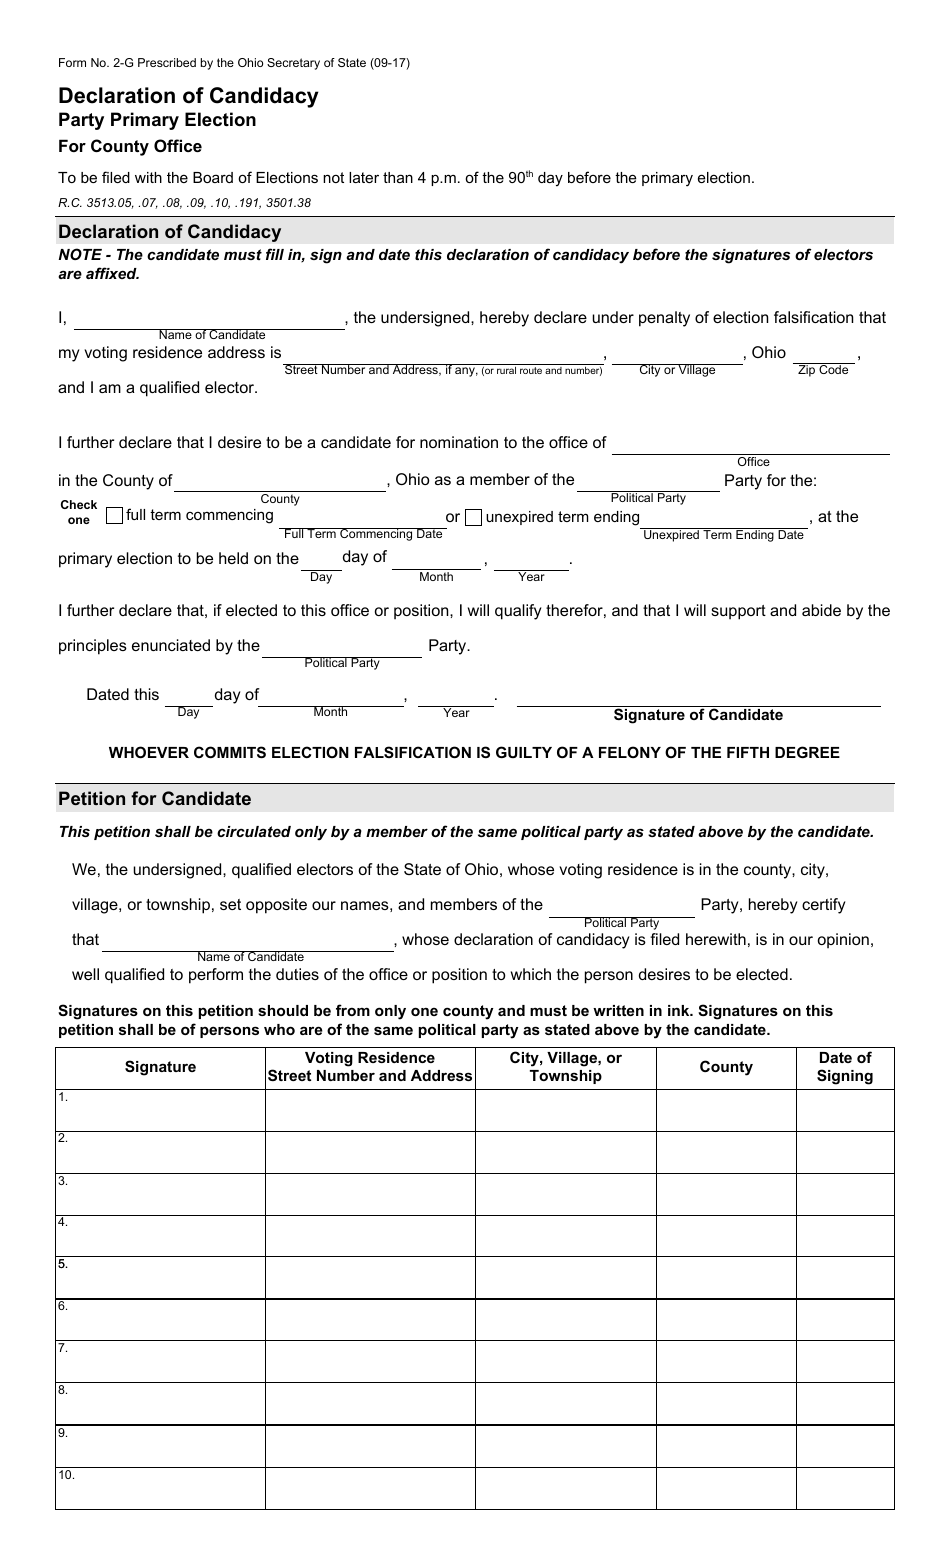 Form 2-G Declaration of Candidacy - Party Primary - County Office - Ohio, Page 1